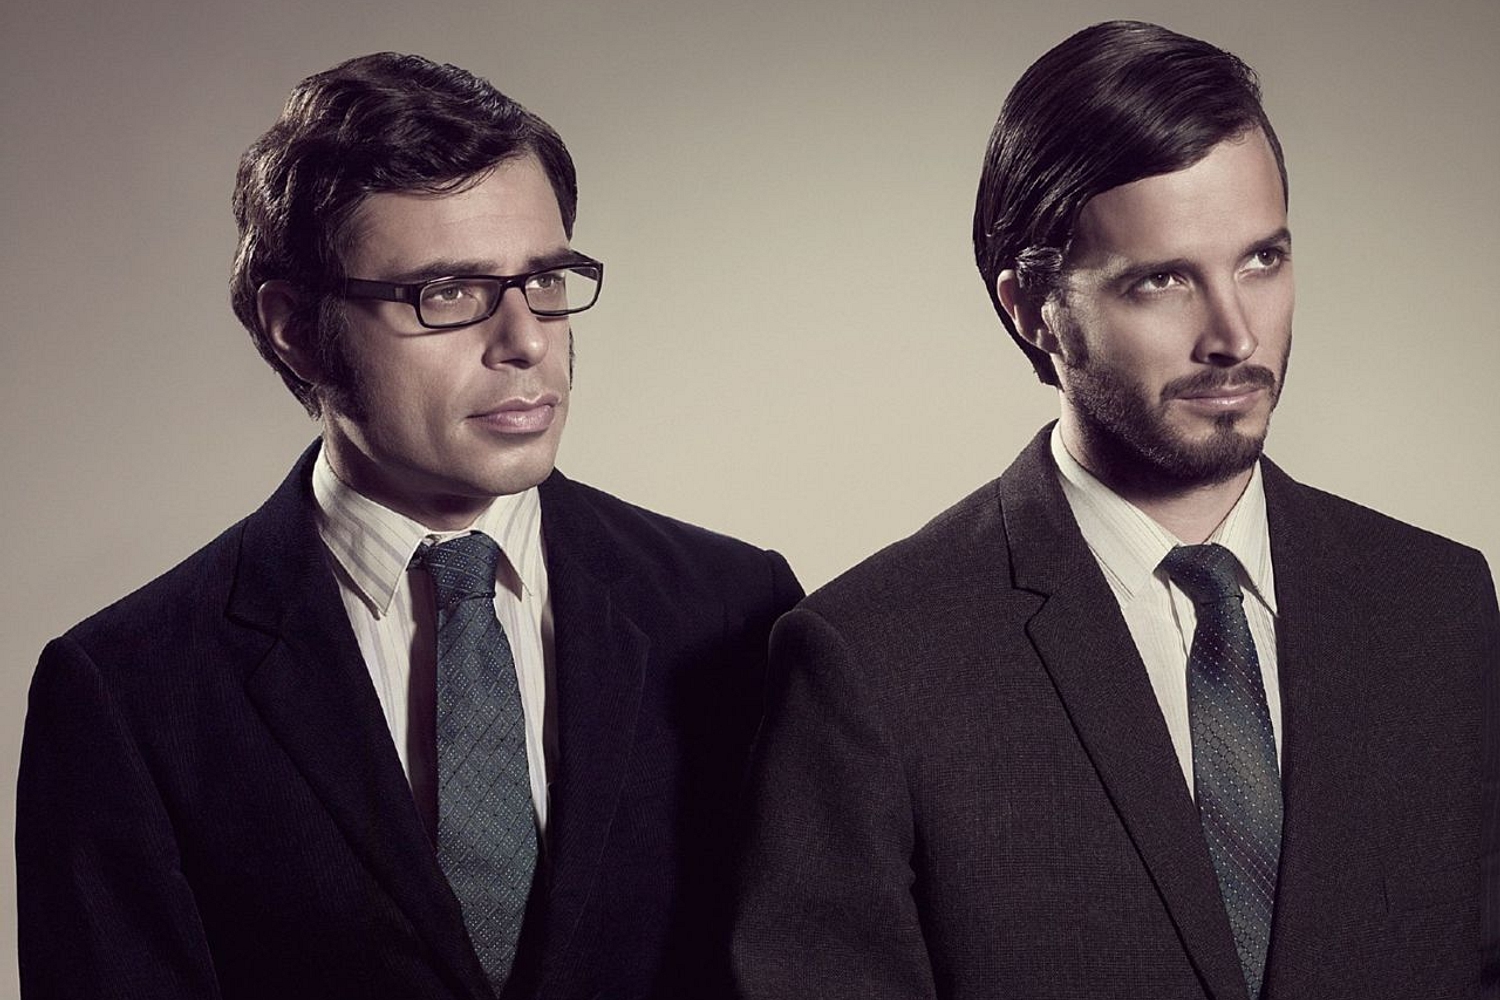 A Flight of the Conchords movie and reunion tour is in the works